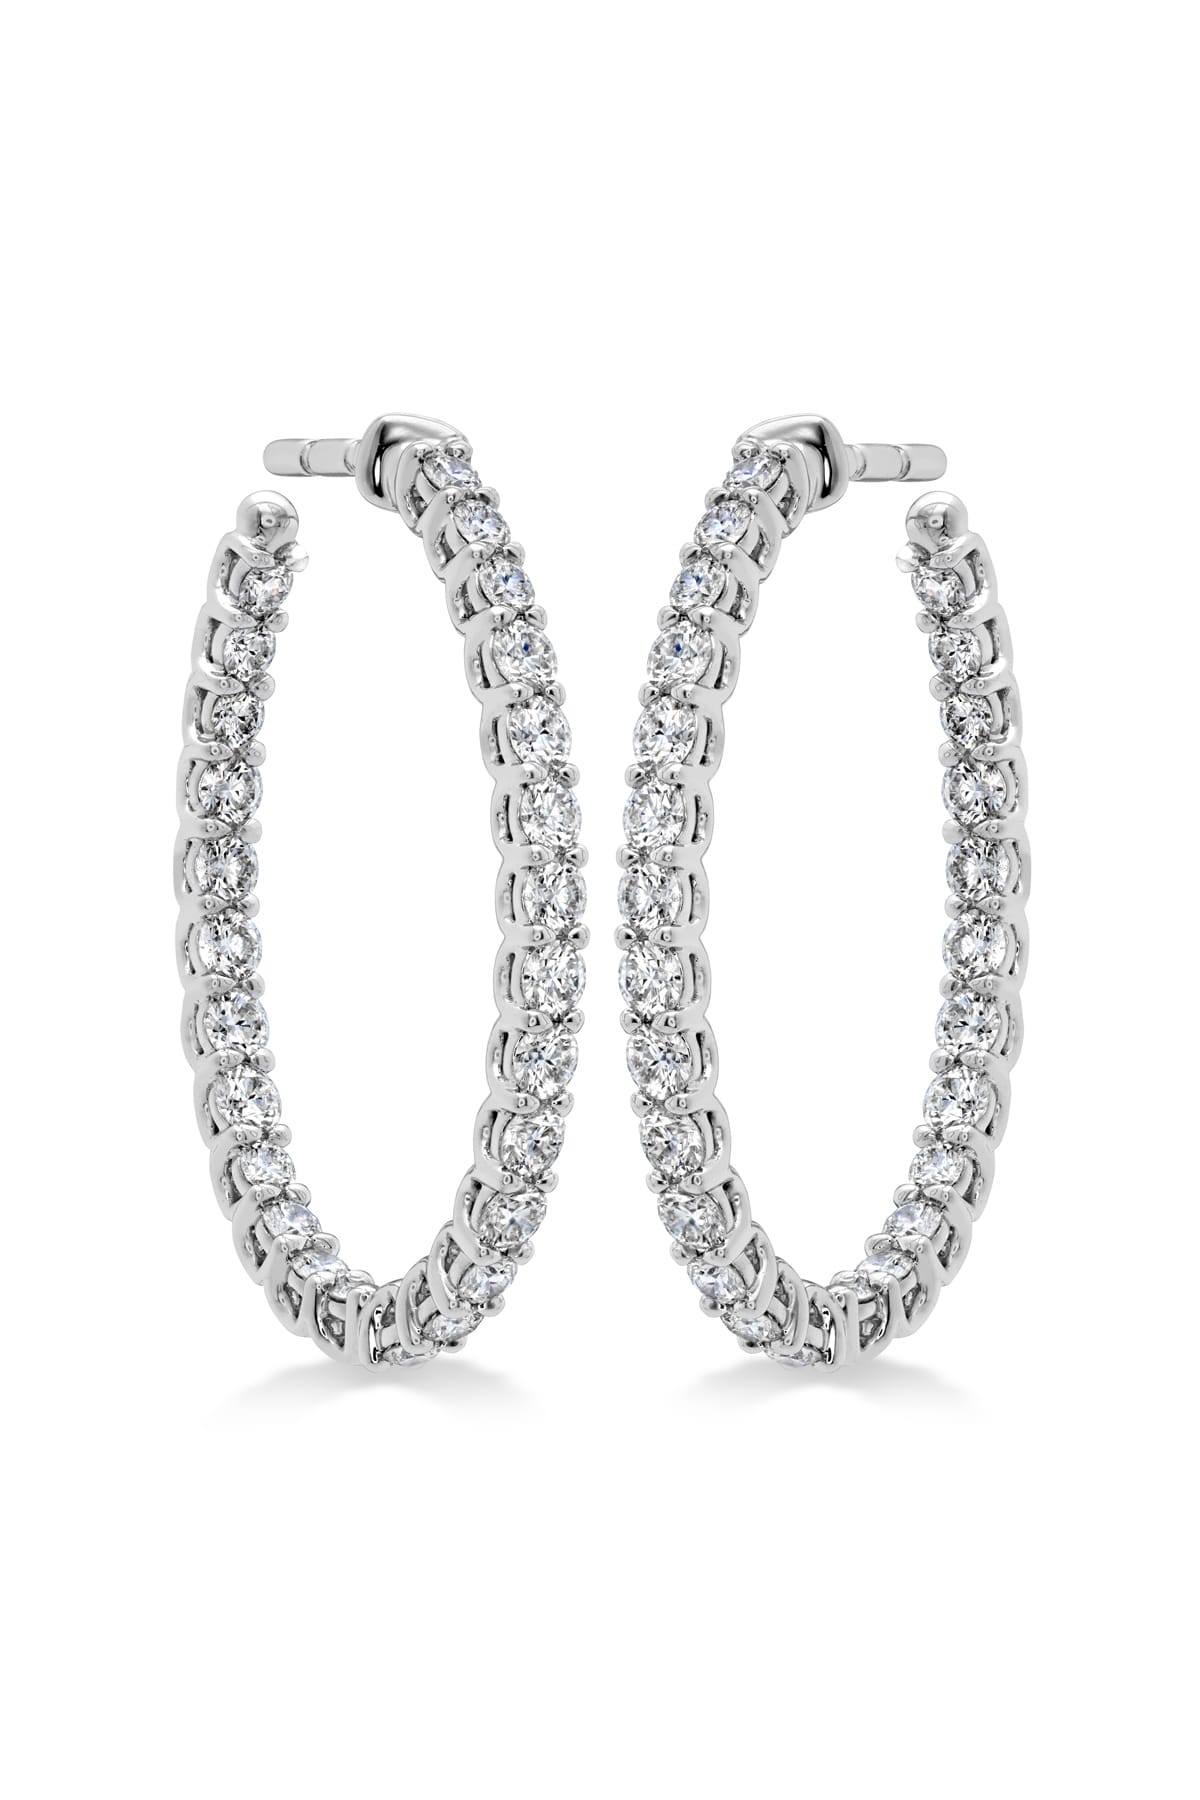 Medium Signature Oval Hoop Earrings From Hearts On Fire available at LeGassick Diamonds and Jewellery Gold Coast, Australia.